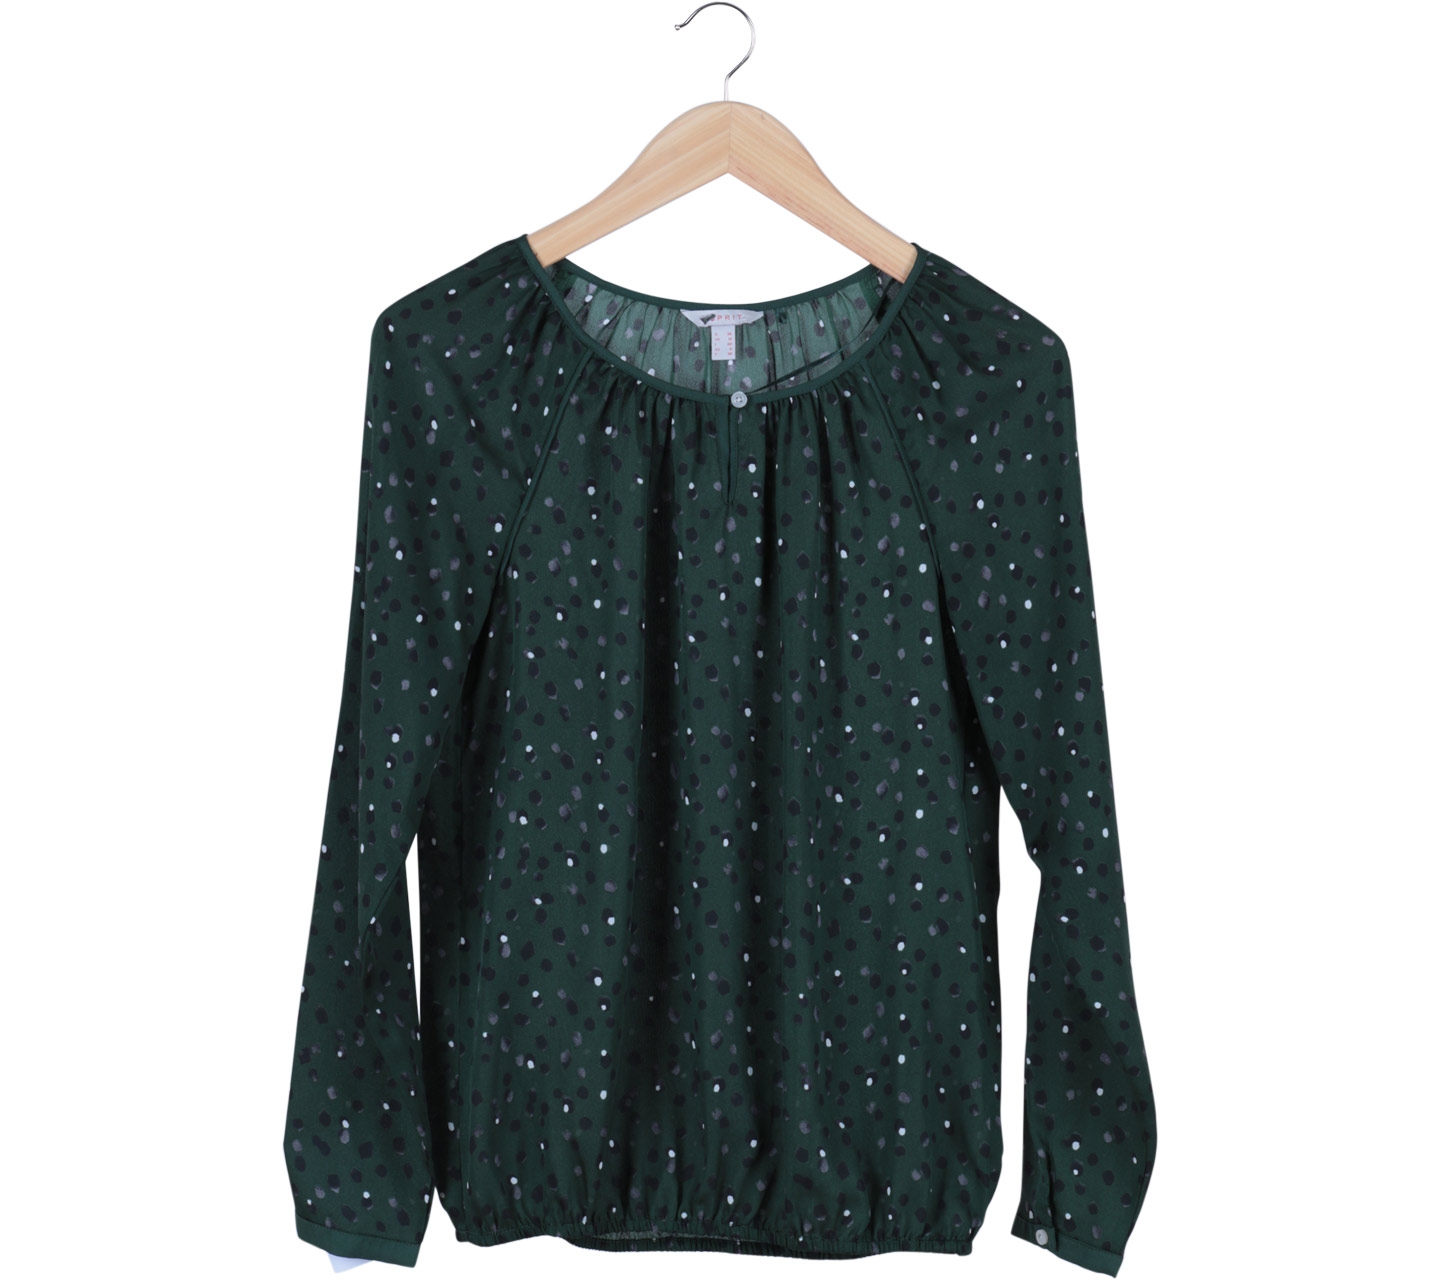 Esprit Green Dotted Blouse